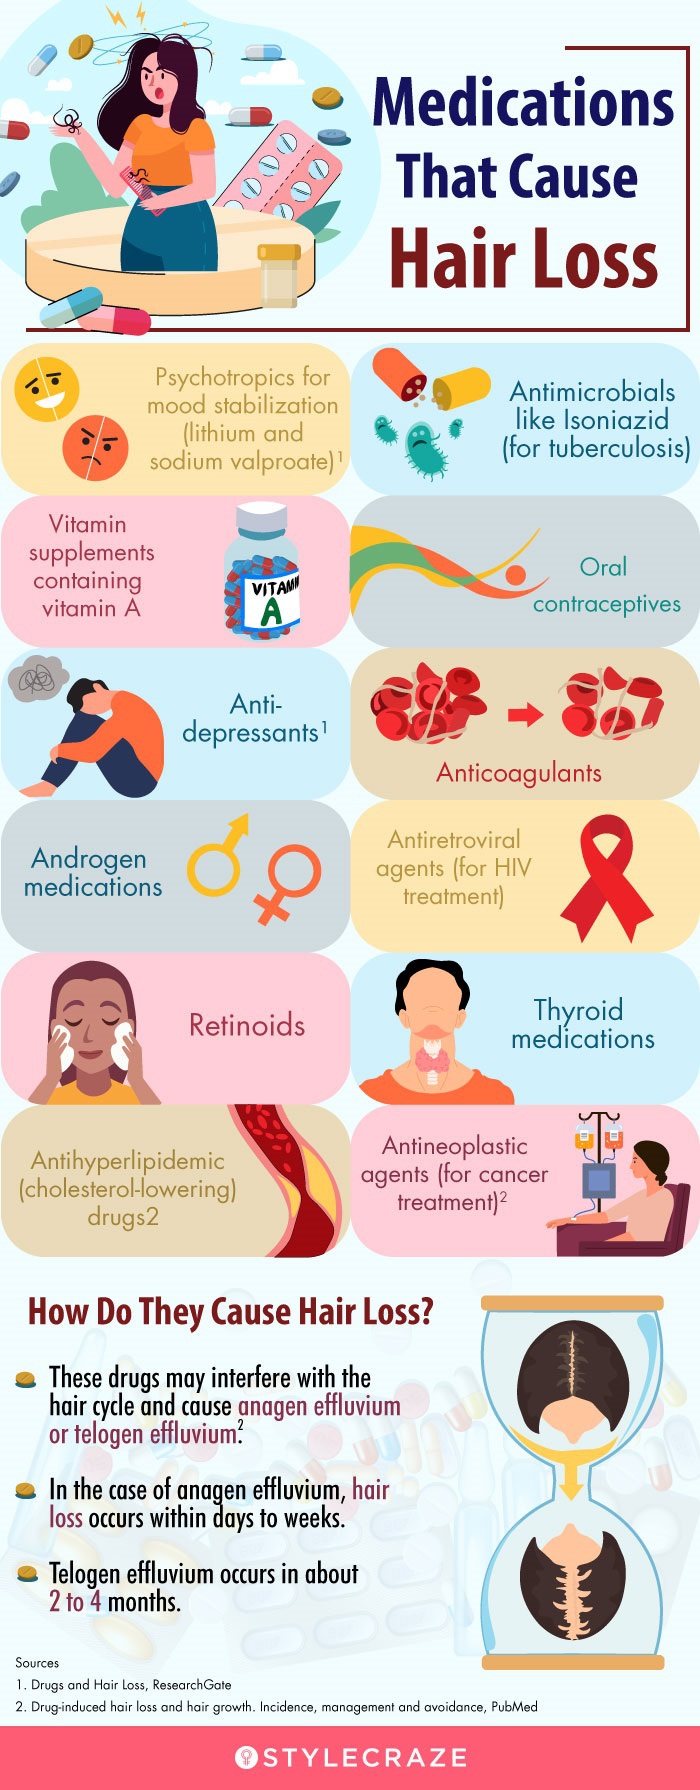 medications that cause hair loss (infographic)